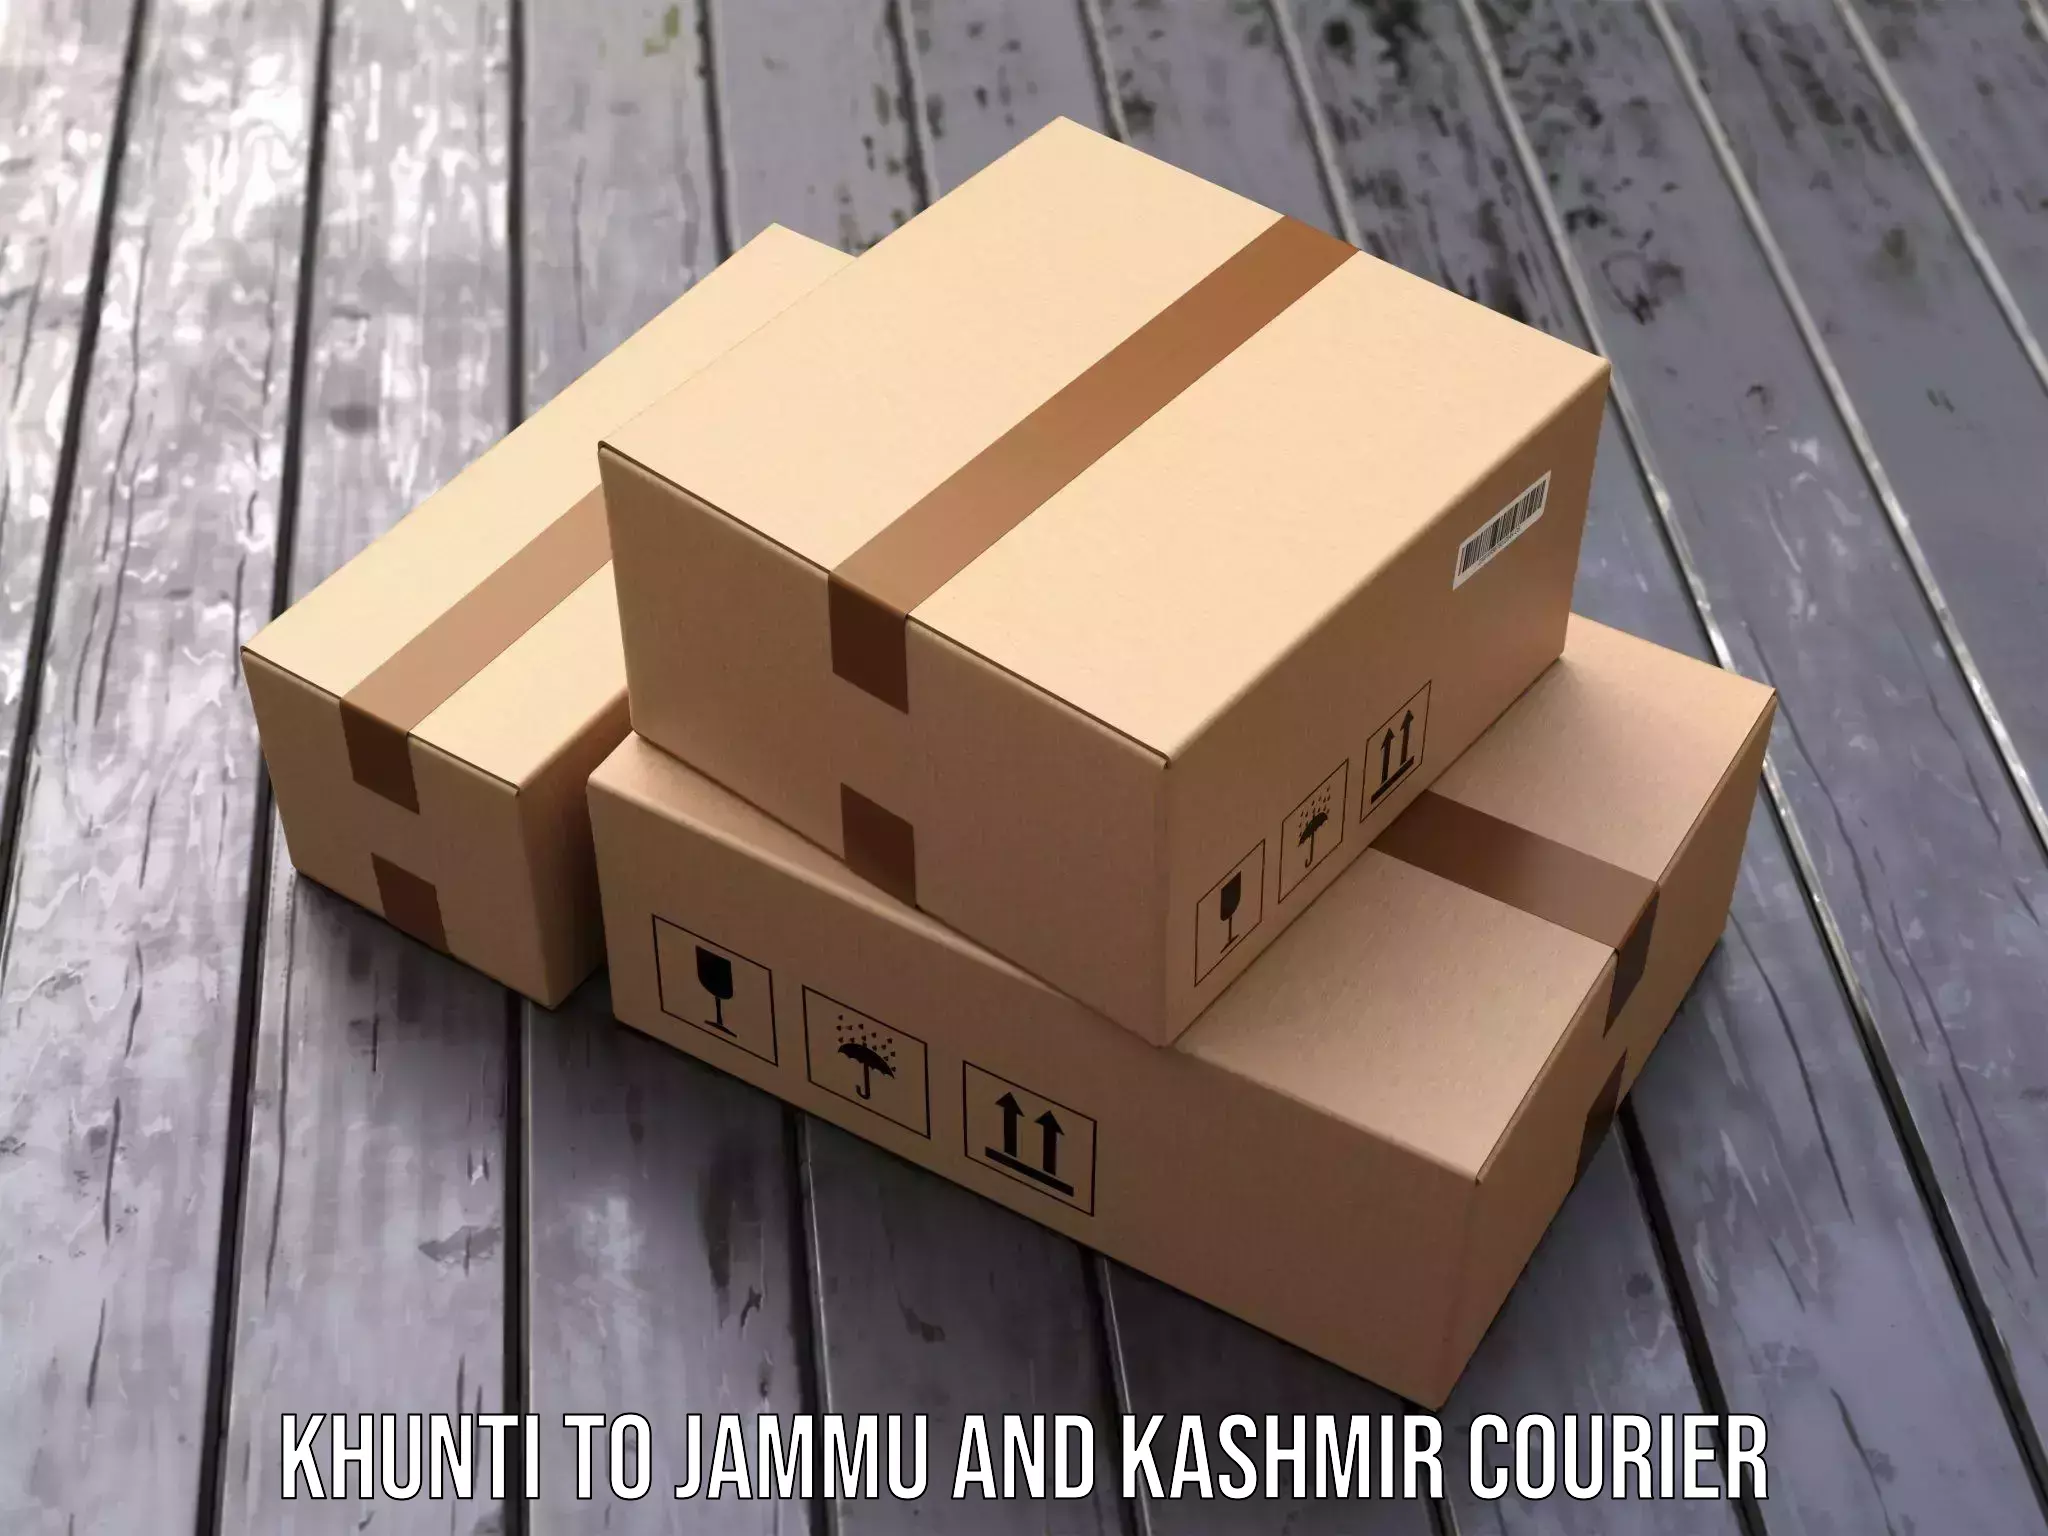 Efficient parcel service Khunti to Jammu and Kashmir